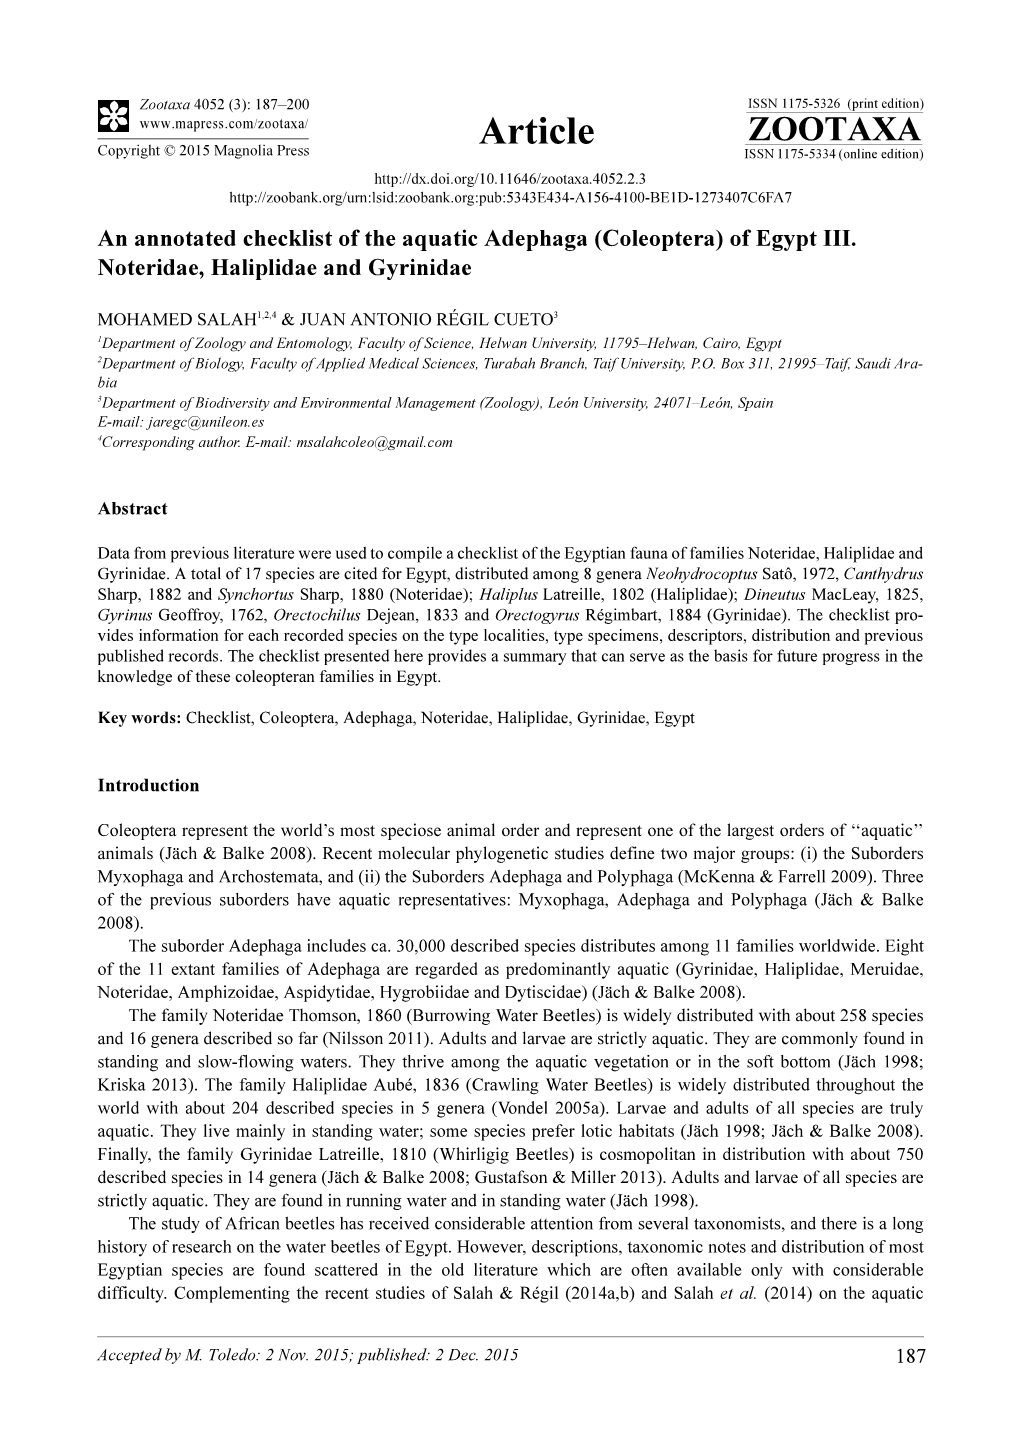 An Annotated Checklist of the Aquatic Adephaga (Coleoptera) of Egypt III